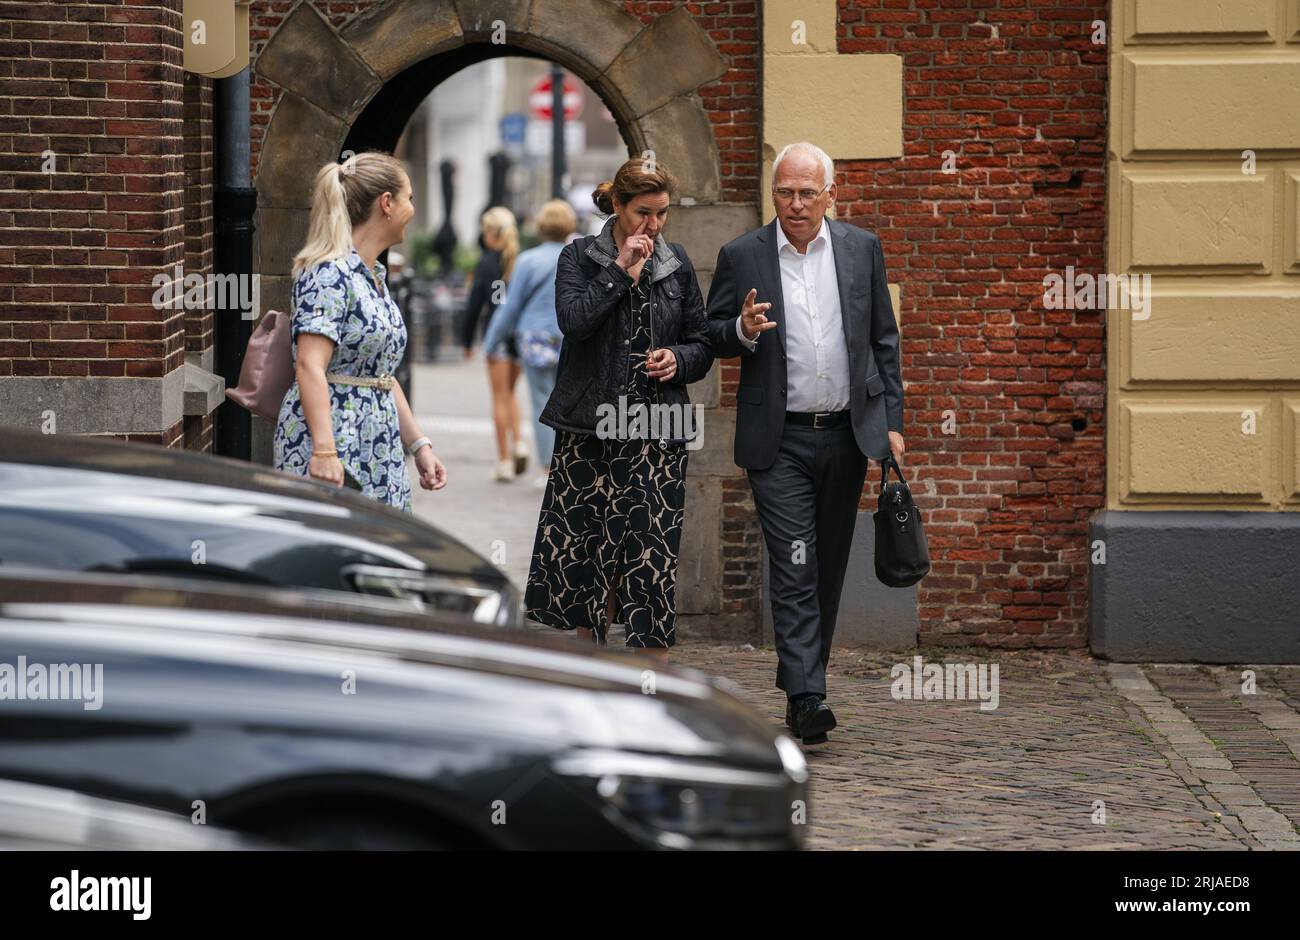 THE HAGUE - Minister Piet Adema arrives at the Ministry of General Affairs at the Binnenhof for the first budget council. Ministers discuss the budget for the coming year, in the run-up to Prinsjesdag. ANP JEROEN JUMELET netherlands out - belgium out Stock Photo